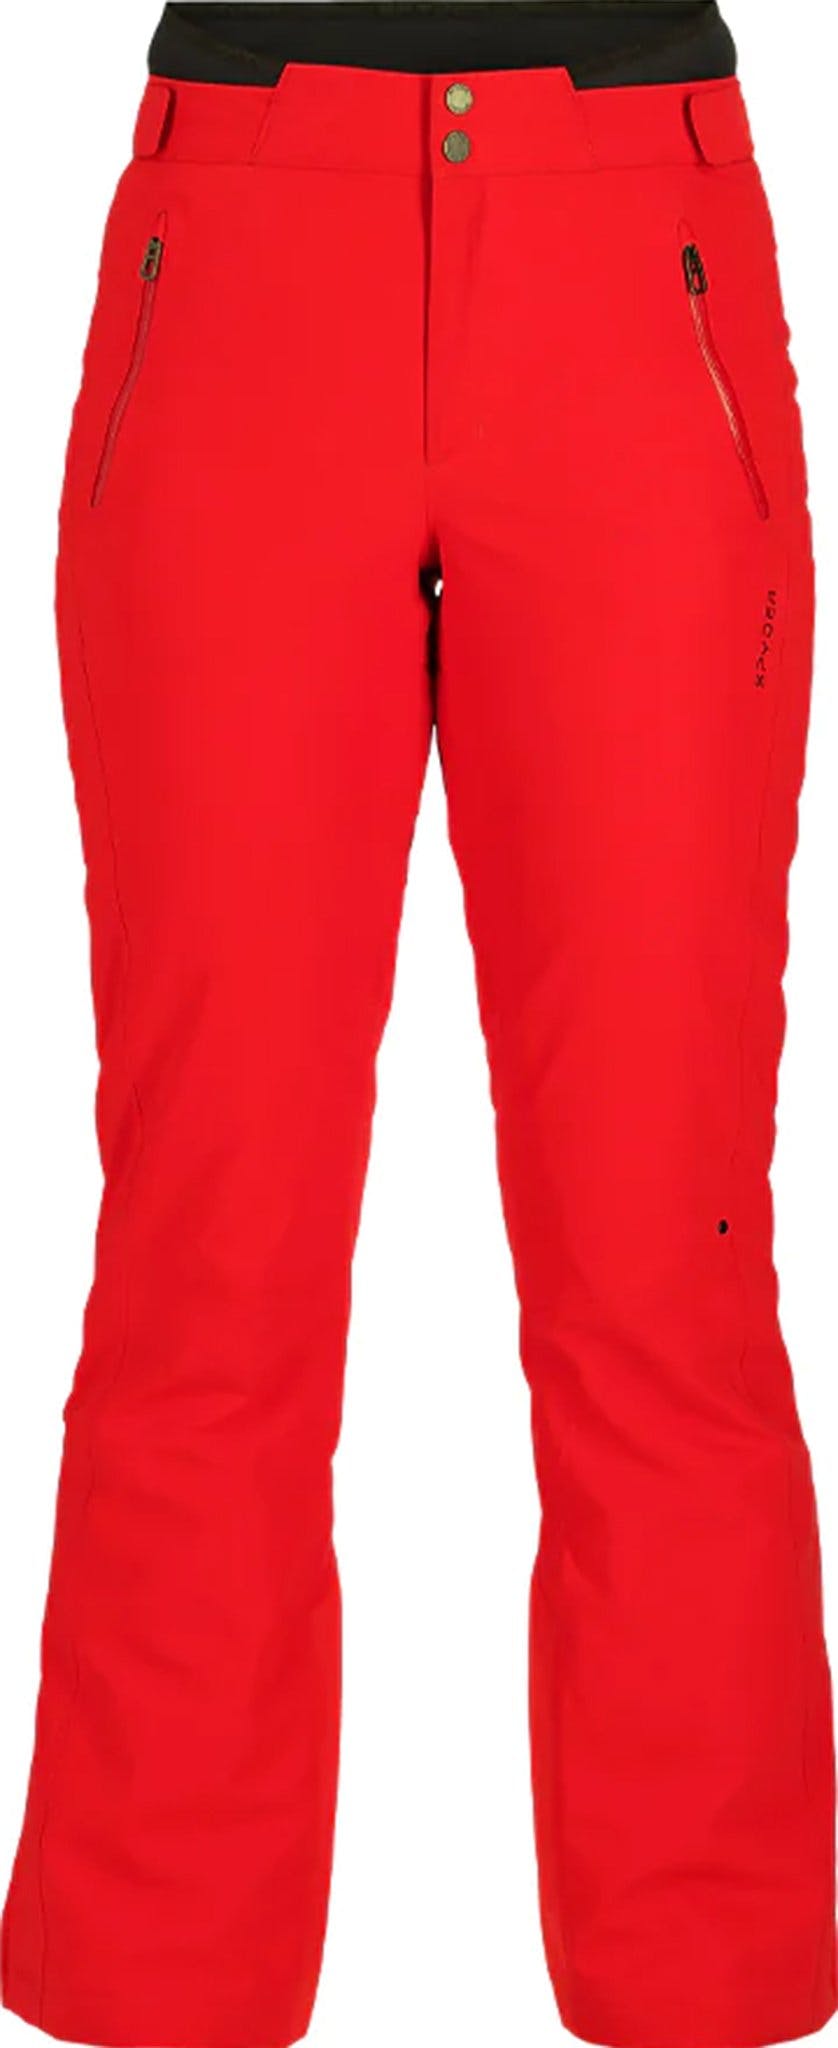 Product image for Echo All-Mountain Ski Pant - Women's